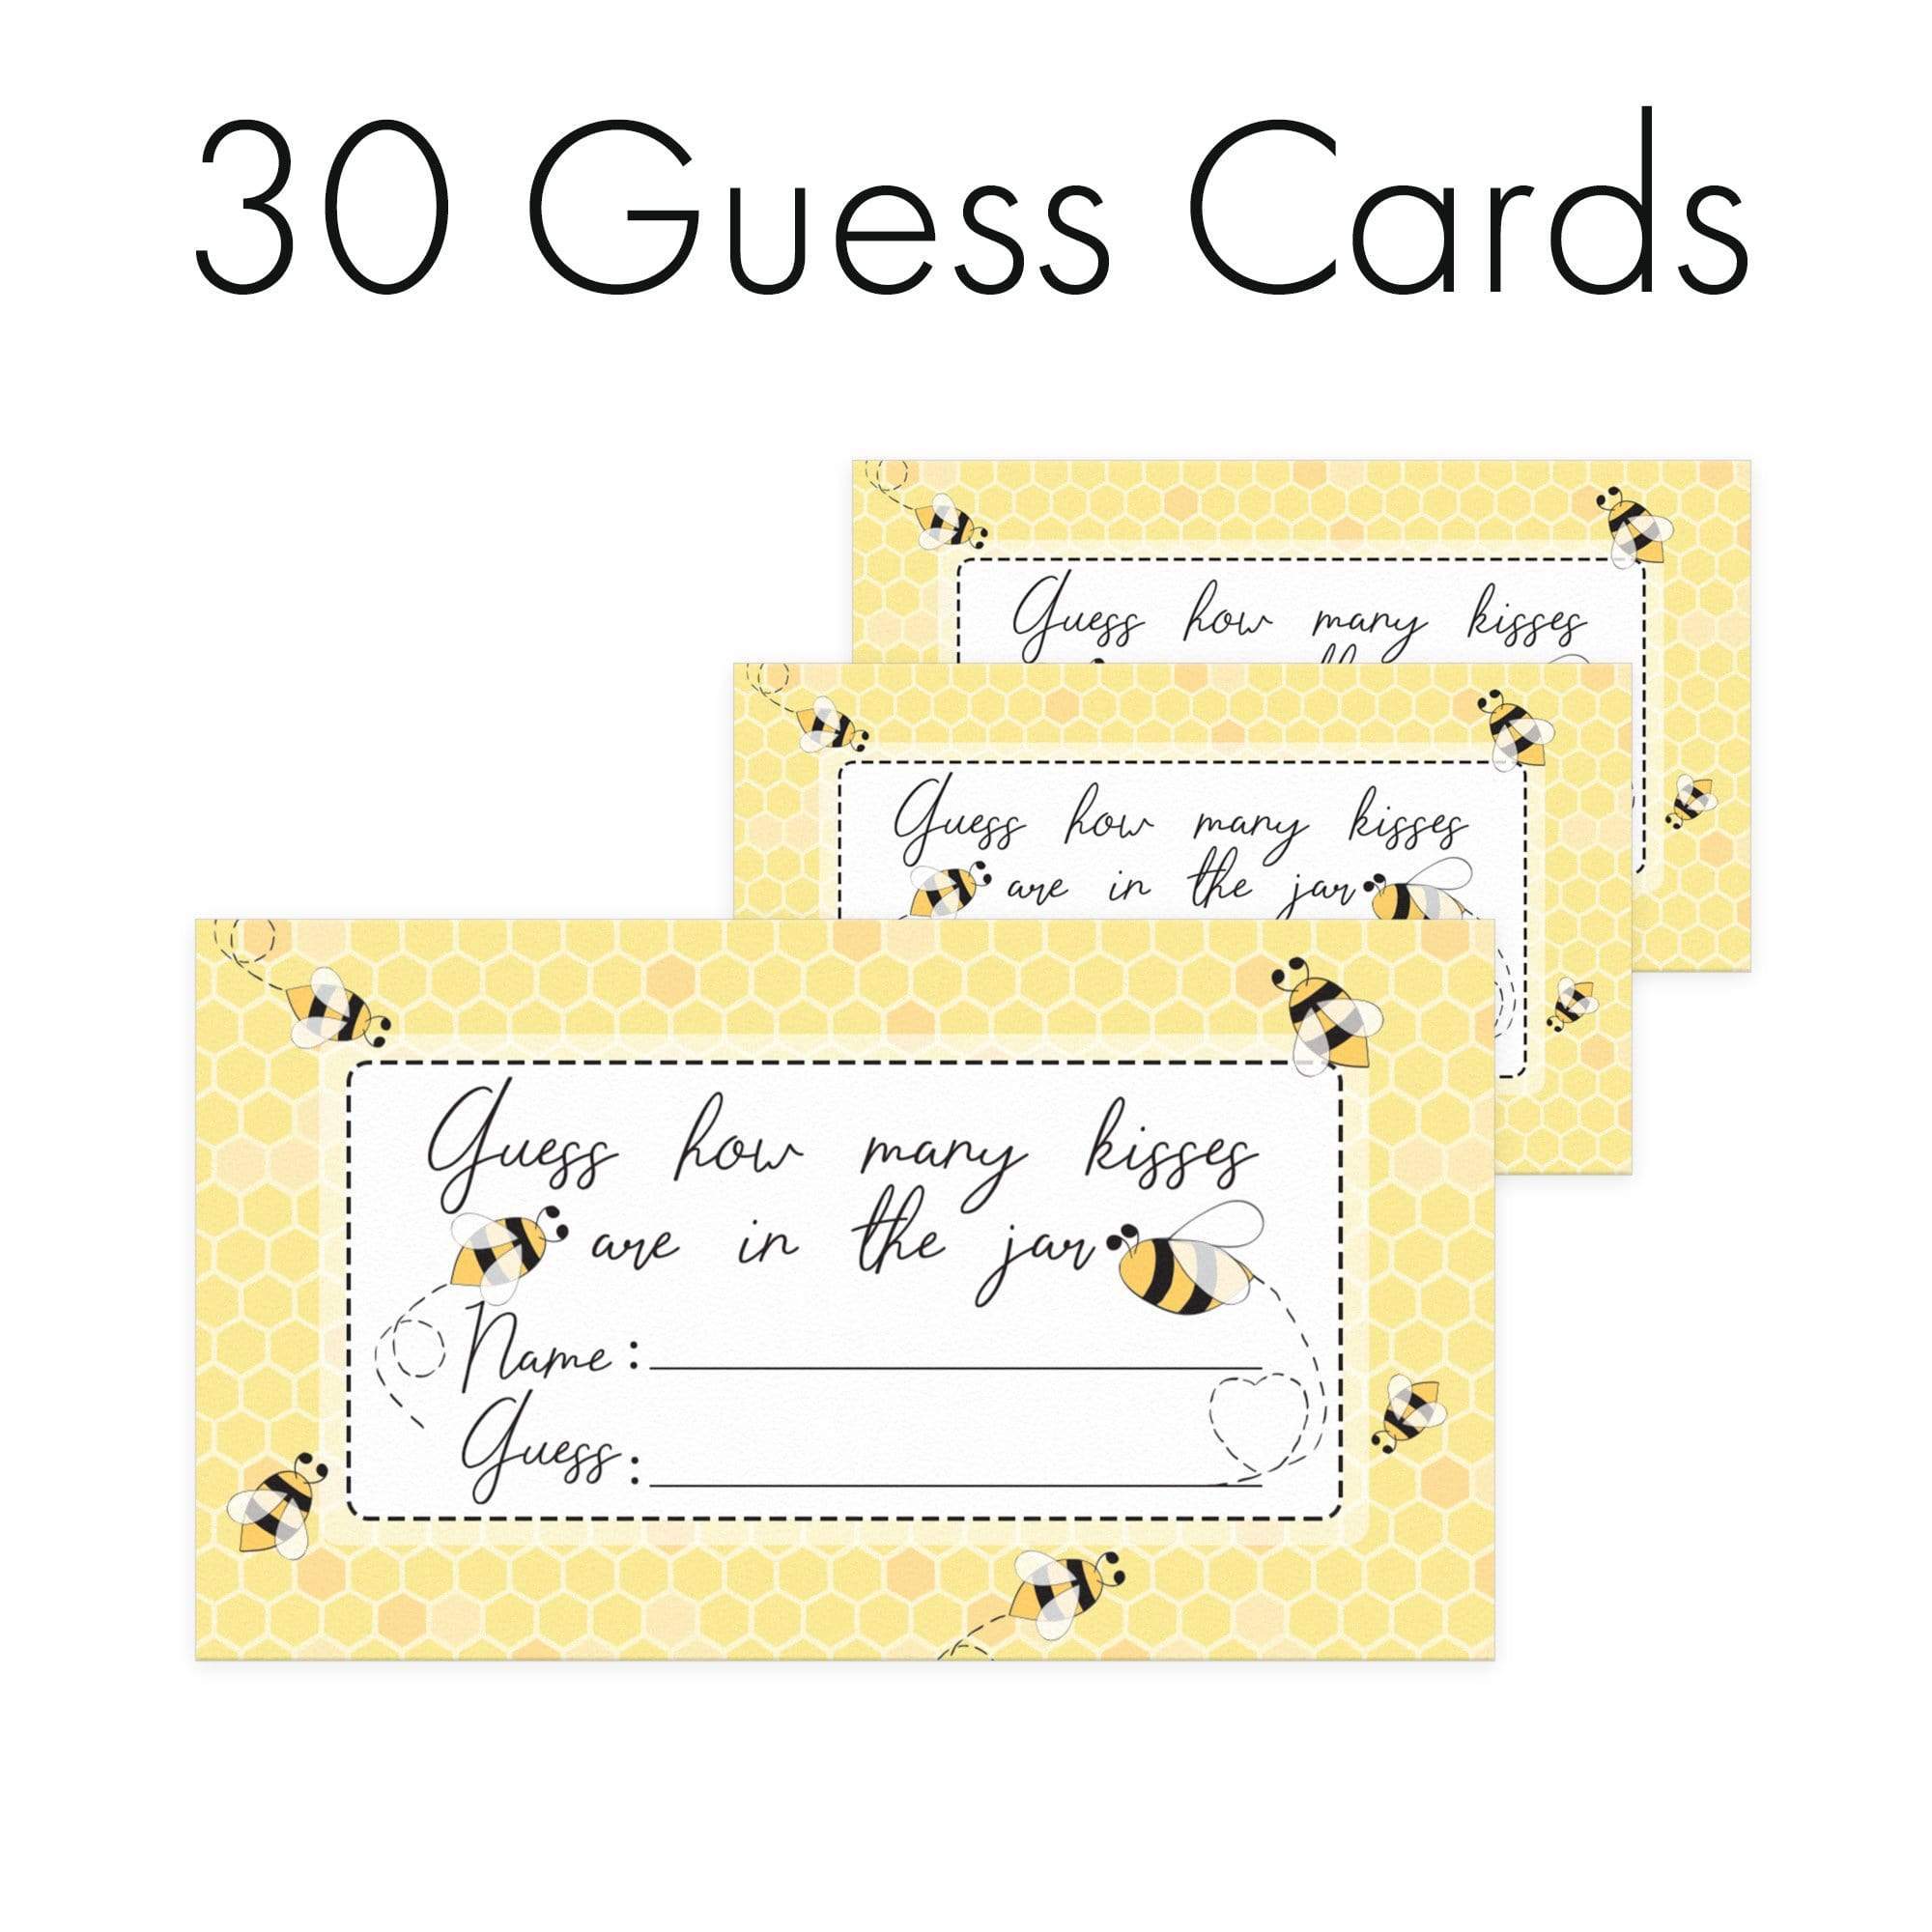 Extra Guess Cards ONLY (No Sign) Bumble Bee How Many Kisses Game